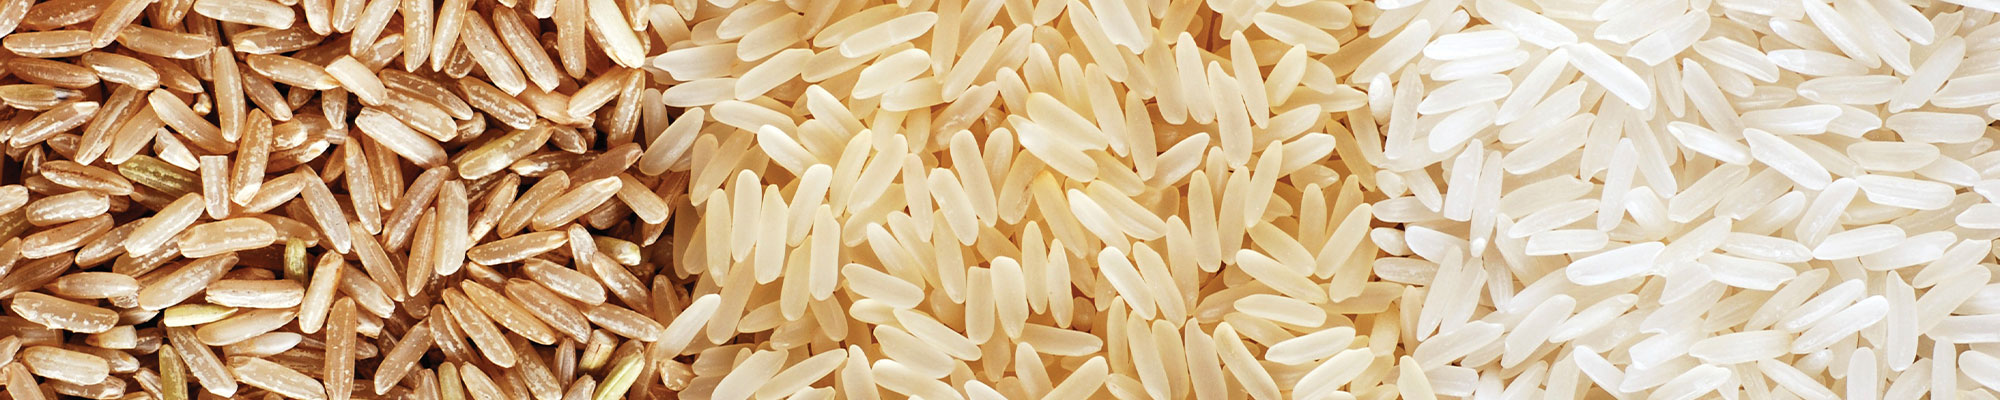 Three different columns of loose rice types-brown, parboiled, and white rice.